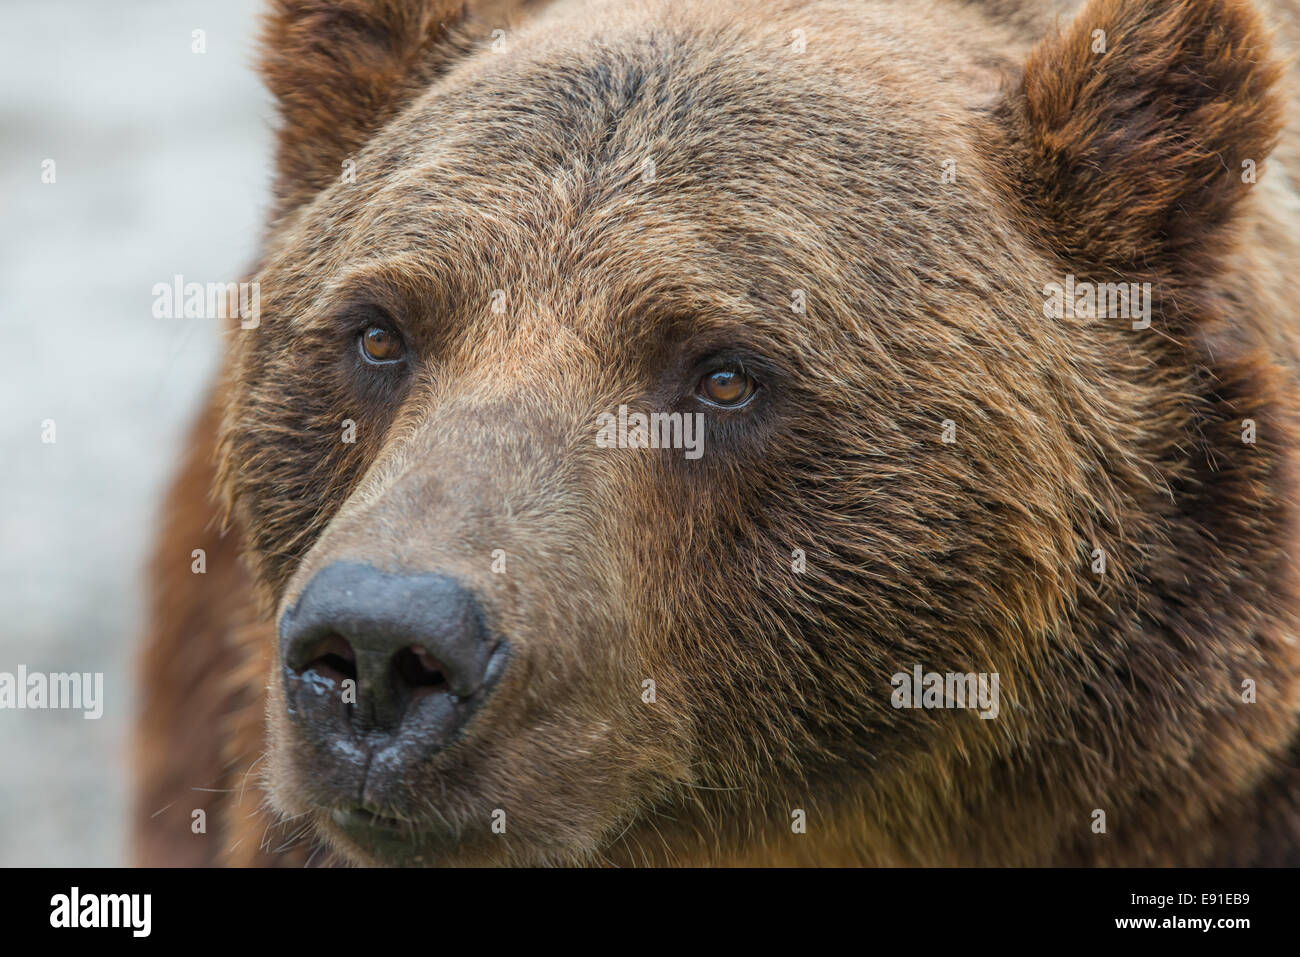 A brown bear closed in a cage in the zoo Stock Photo